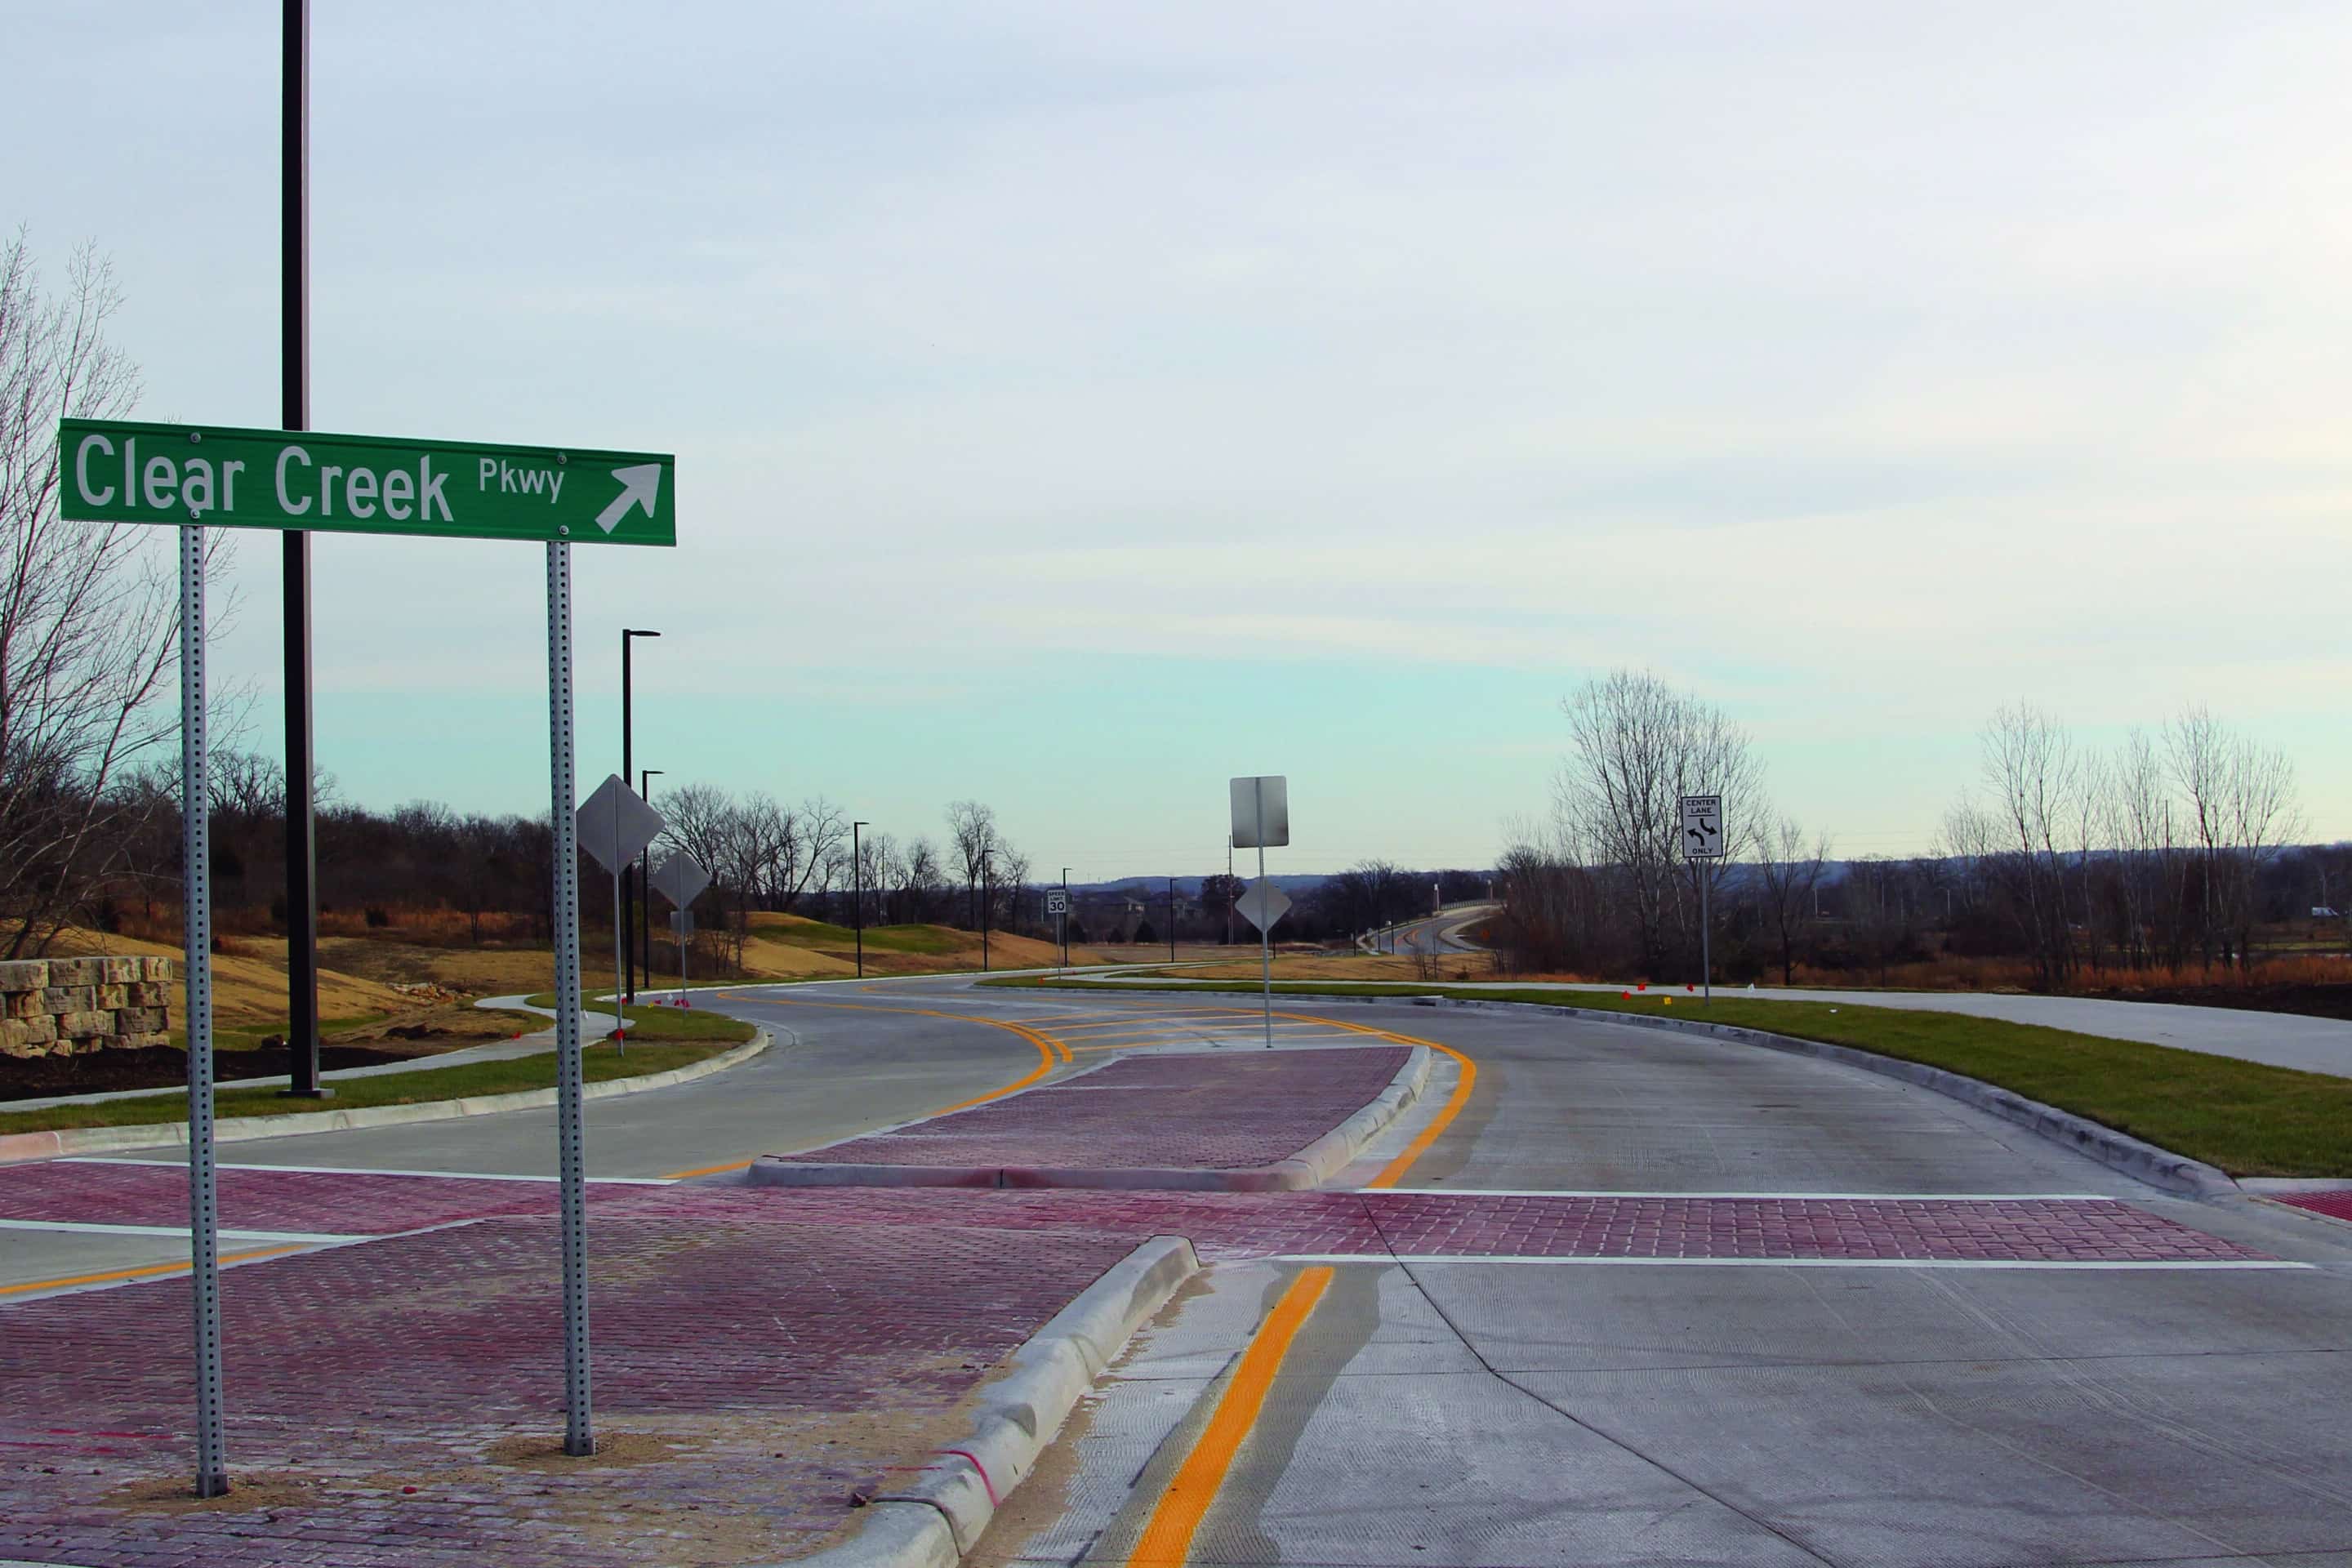 Clear Creek Parkway signage and colored concrete sidewalks.